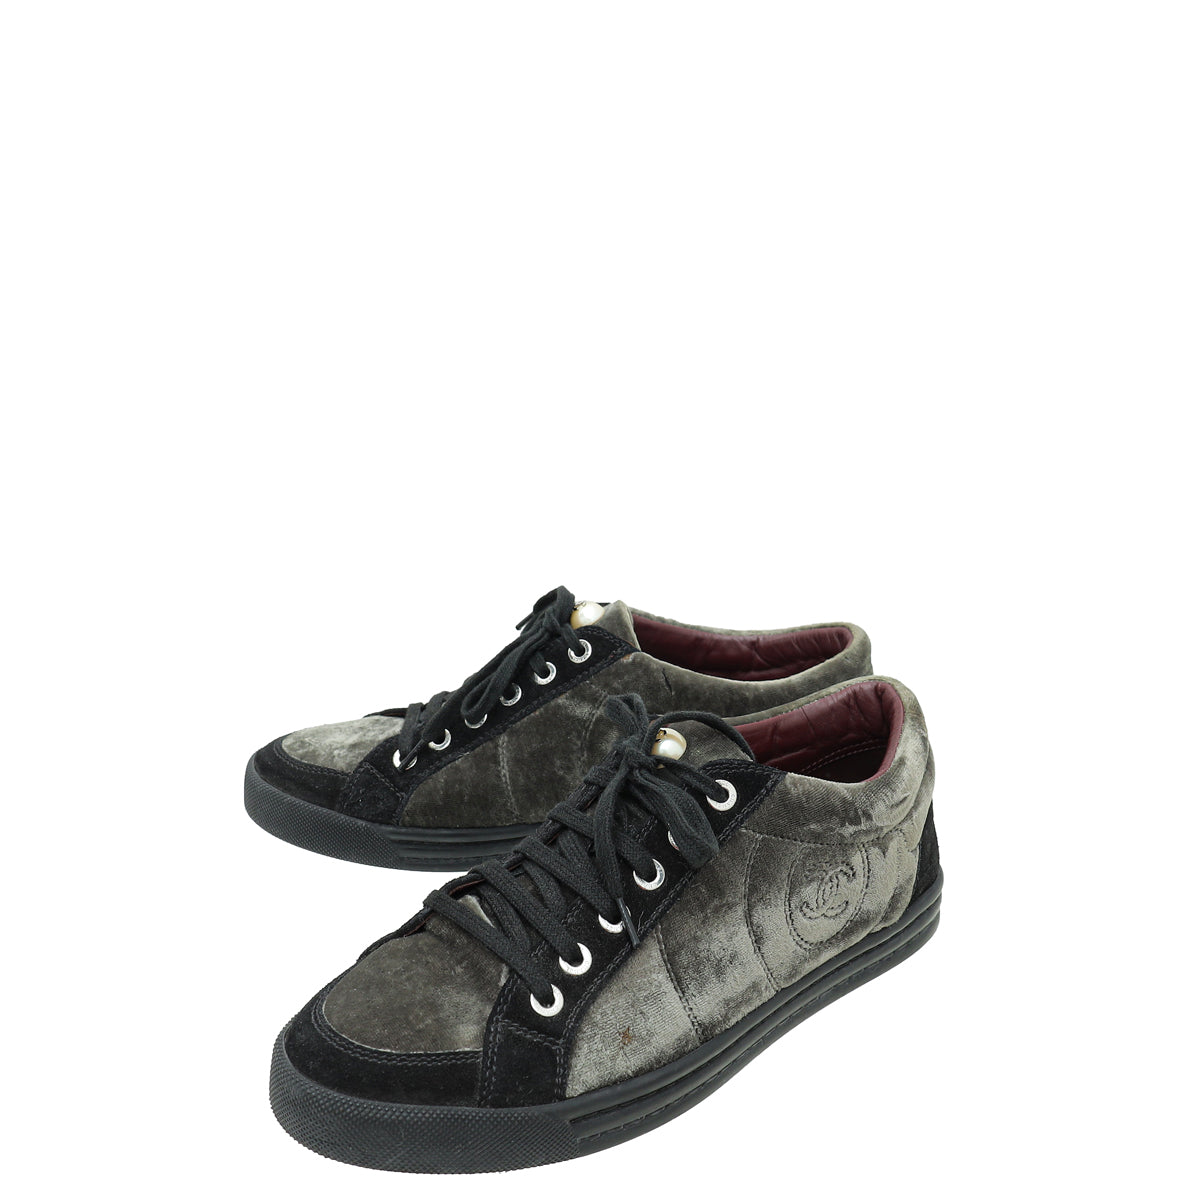 Chanel Bicolor CC Pearl Velvet Suede Lace Up Sneakers 38.5 – The Closet